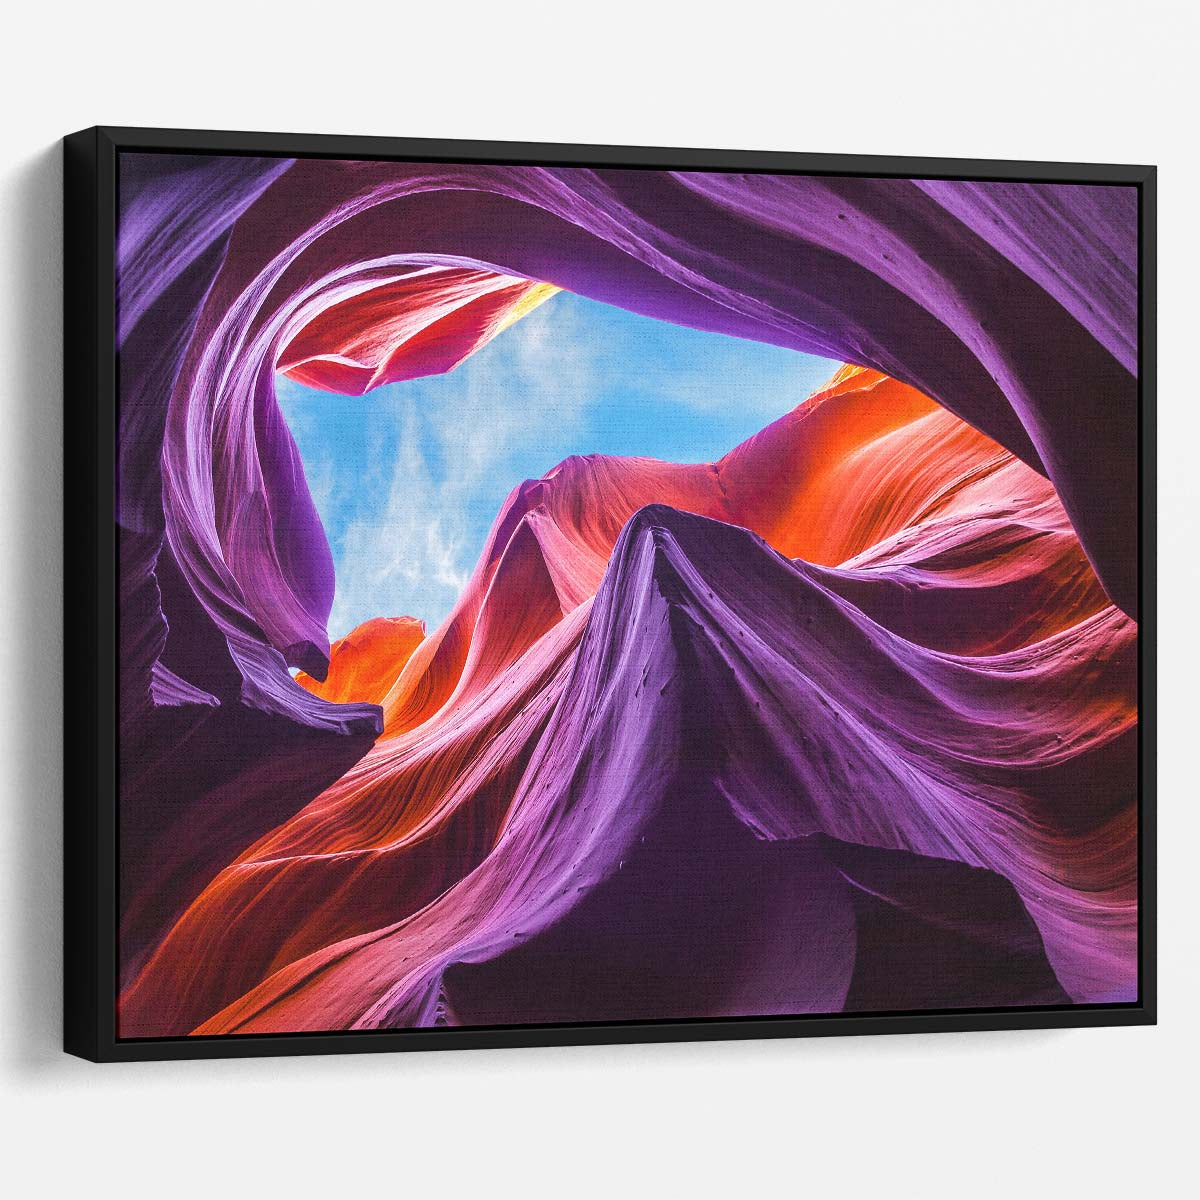 Vibrant Antelope Canyon Arizona Landscape Wall Art by Luxuriance Designs. Made in USA.